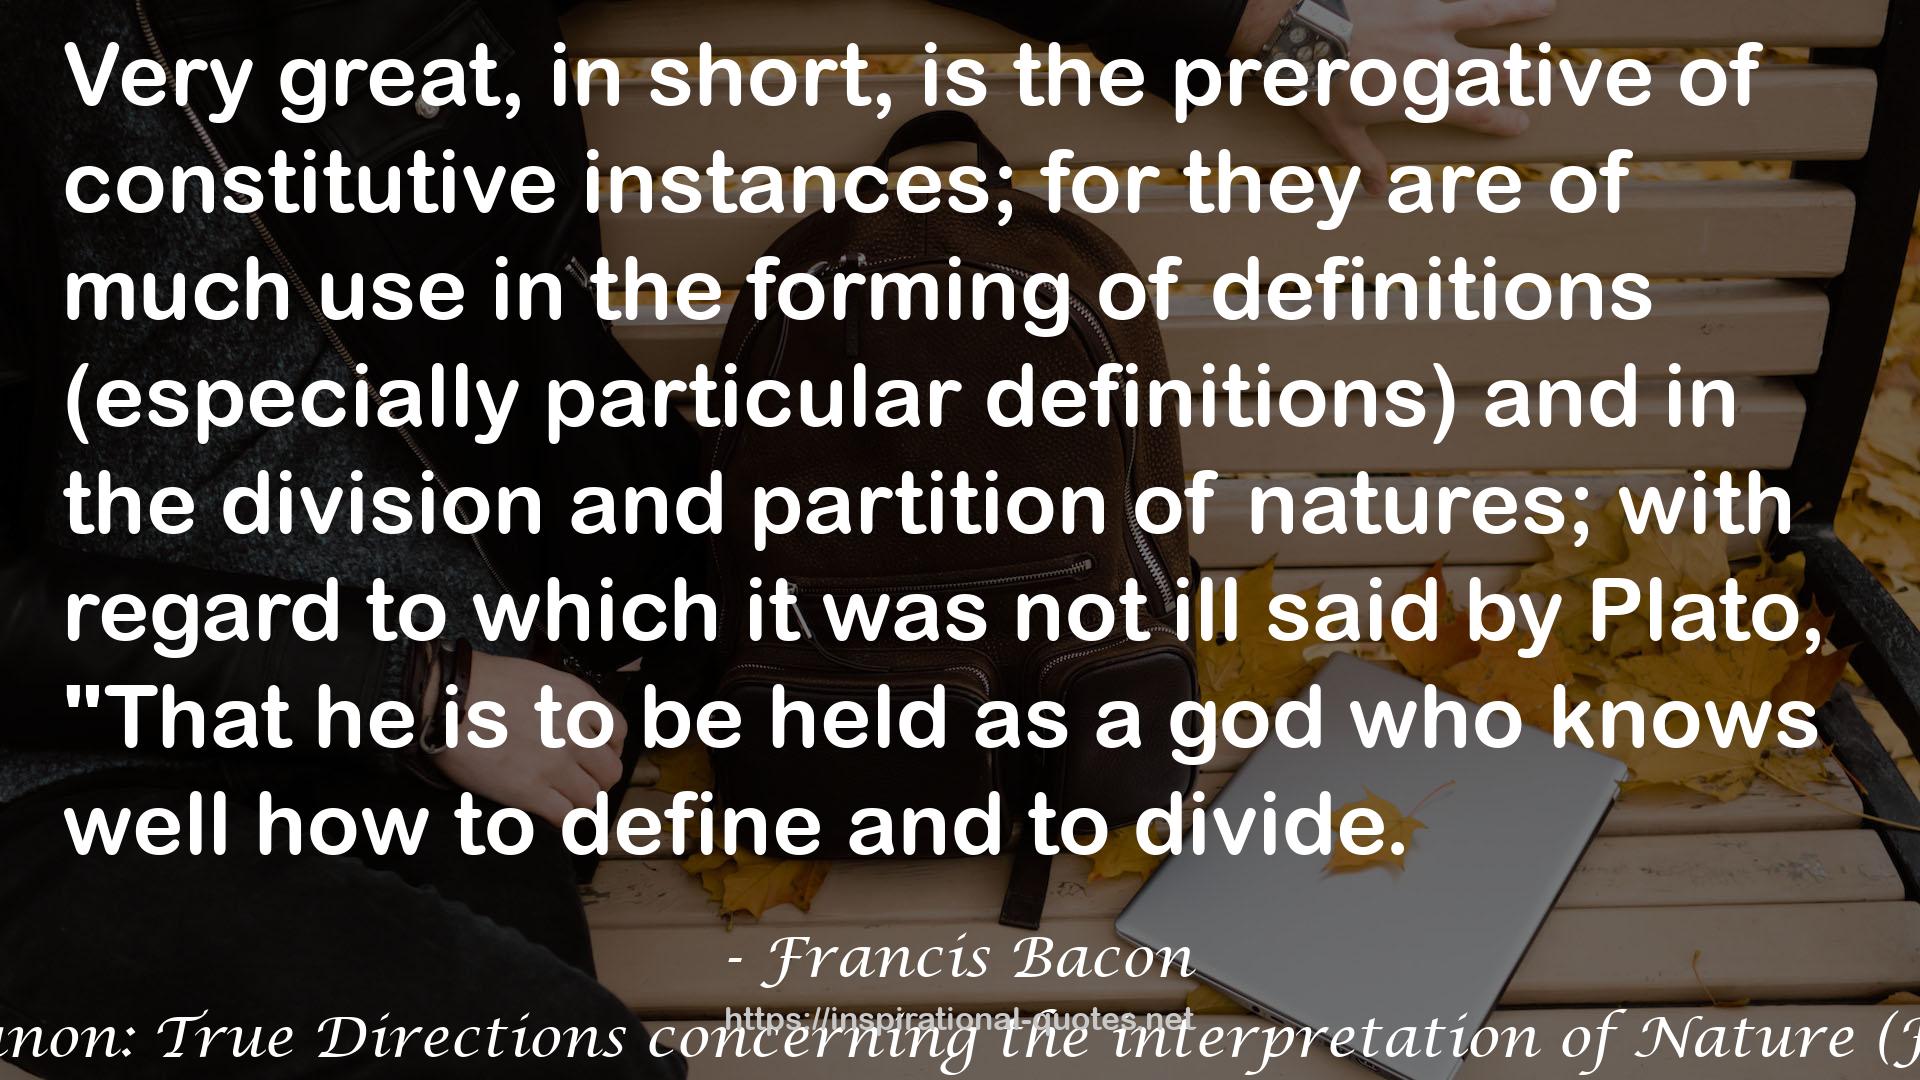 The New Organon: True Directions concerning the interpretation of Nature (Francis Bacon) QUOTES